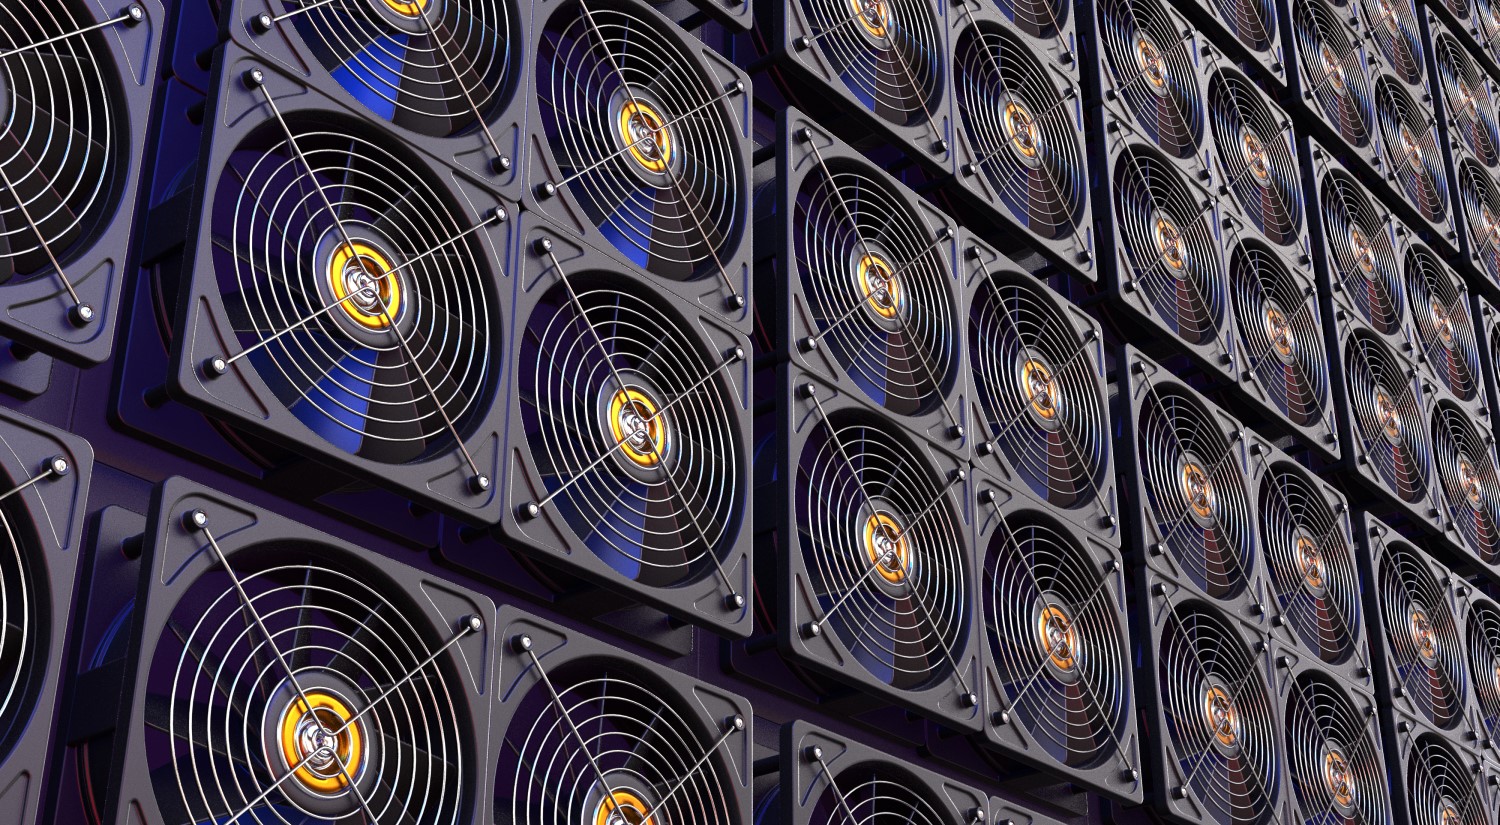 Funding Approved For Audit Of Ethereum’s ProgPoW Mining Proposal